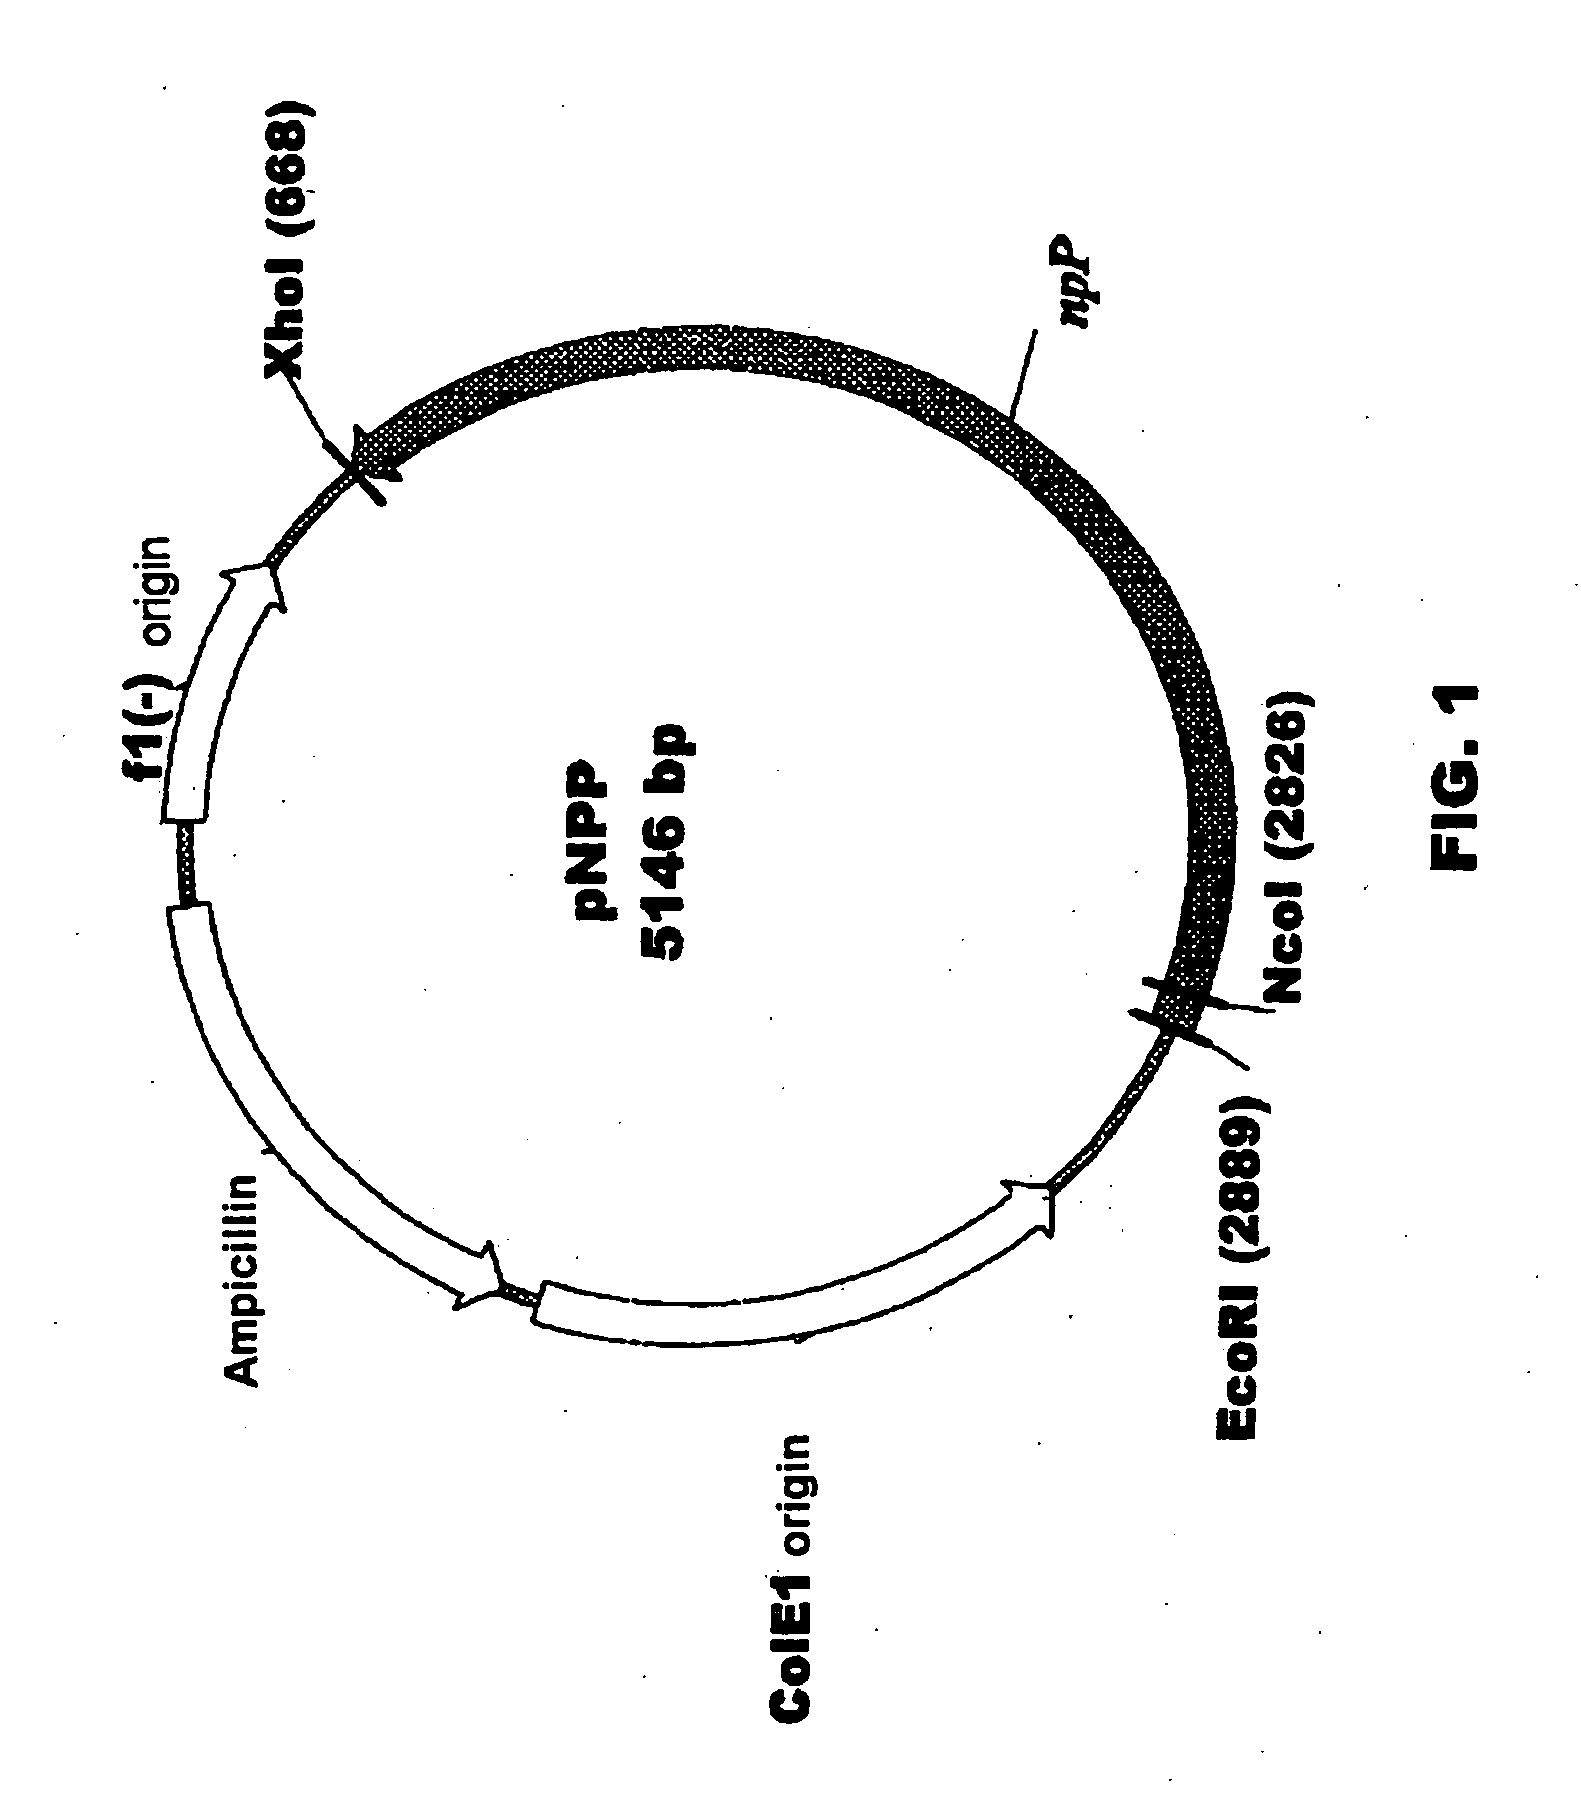 Plant nucleotide-sugar pyrophosphatase/phosphodiesterase (nppase), method of obtaining same and use of same in the production of assay devices and in the production of transgenic plants